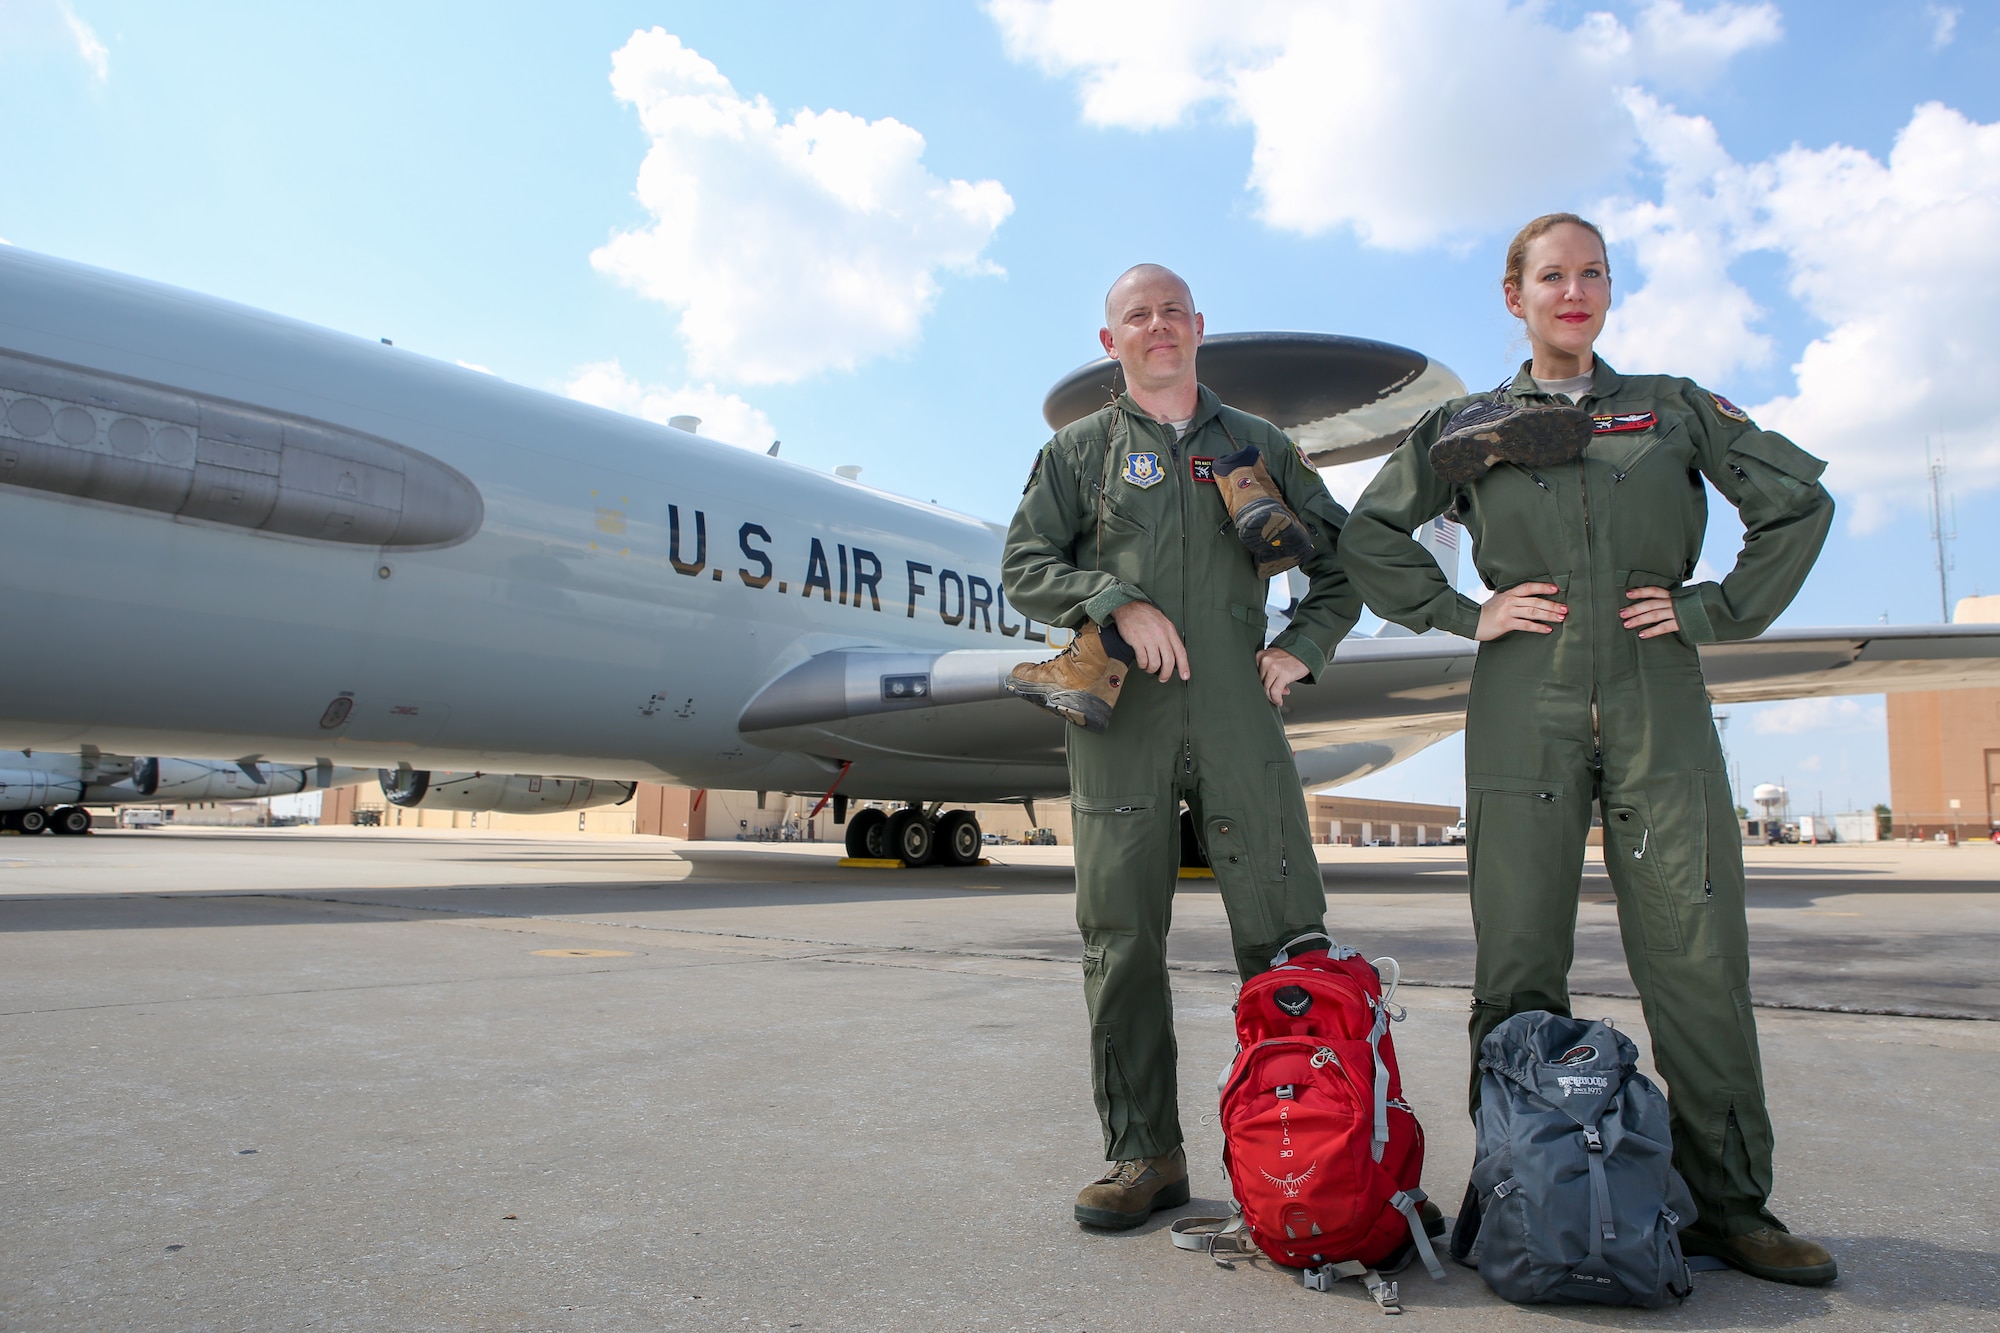 Senior Airman Kelly Higgins, left, and Master Sgt. Amanda Black, both assigned to the 970th Airborne Air Control Squadron at Tinker Air Force Base, Oklahoma, show off their hiking gear August 3 in front of an E-3 Sentry at Tinker. Higgins and Black hiked more than 36 miles during a recent trip to Hawaii. (U.S. Air Force photo/Staff Sgt. Caleb Wanzer)